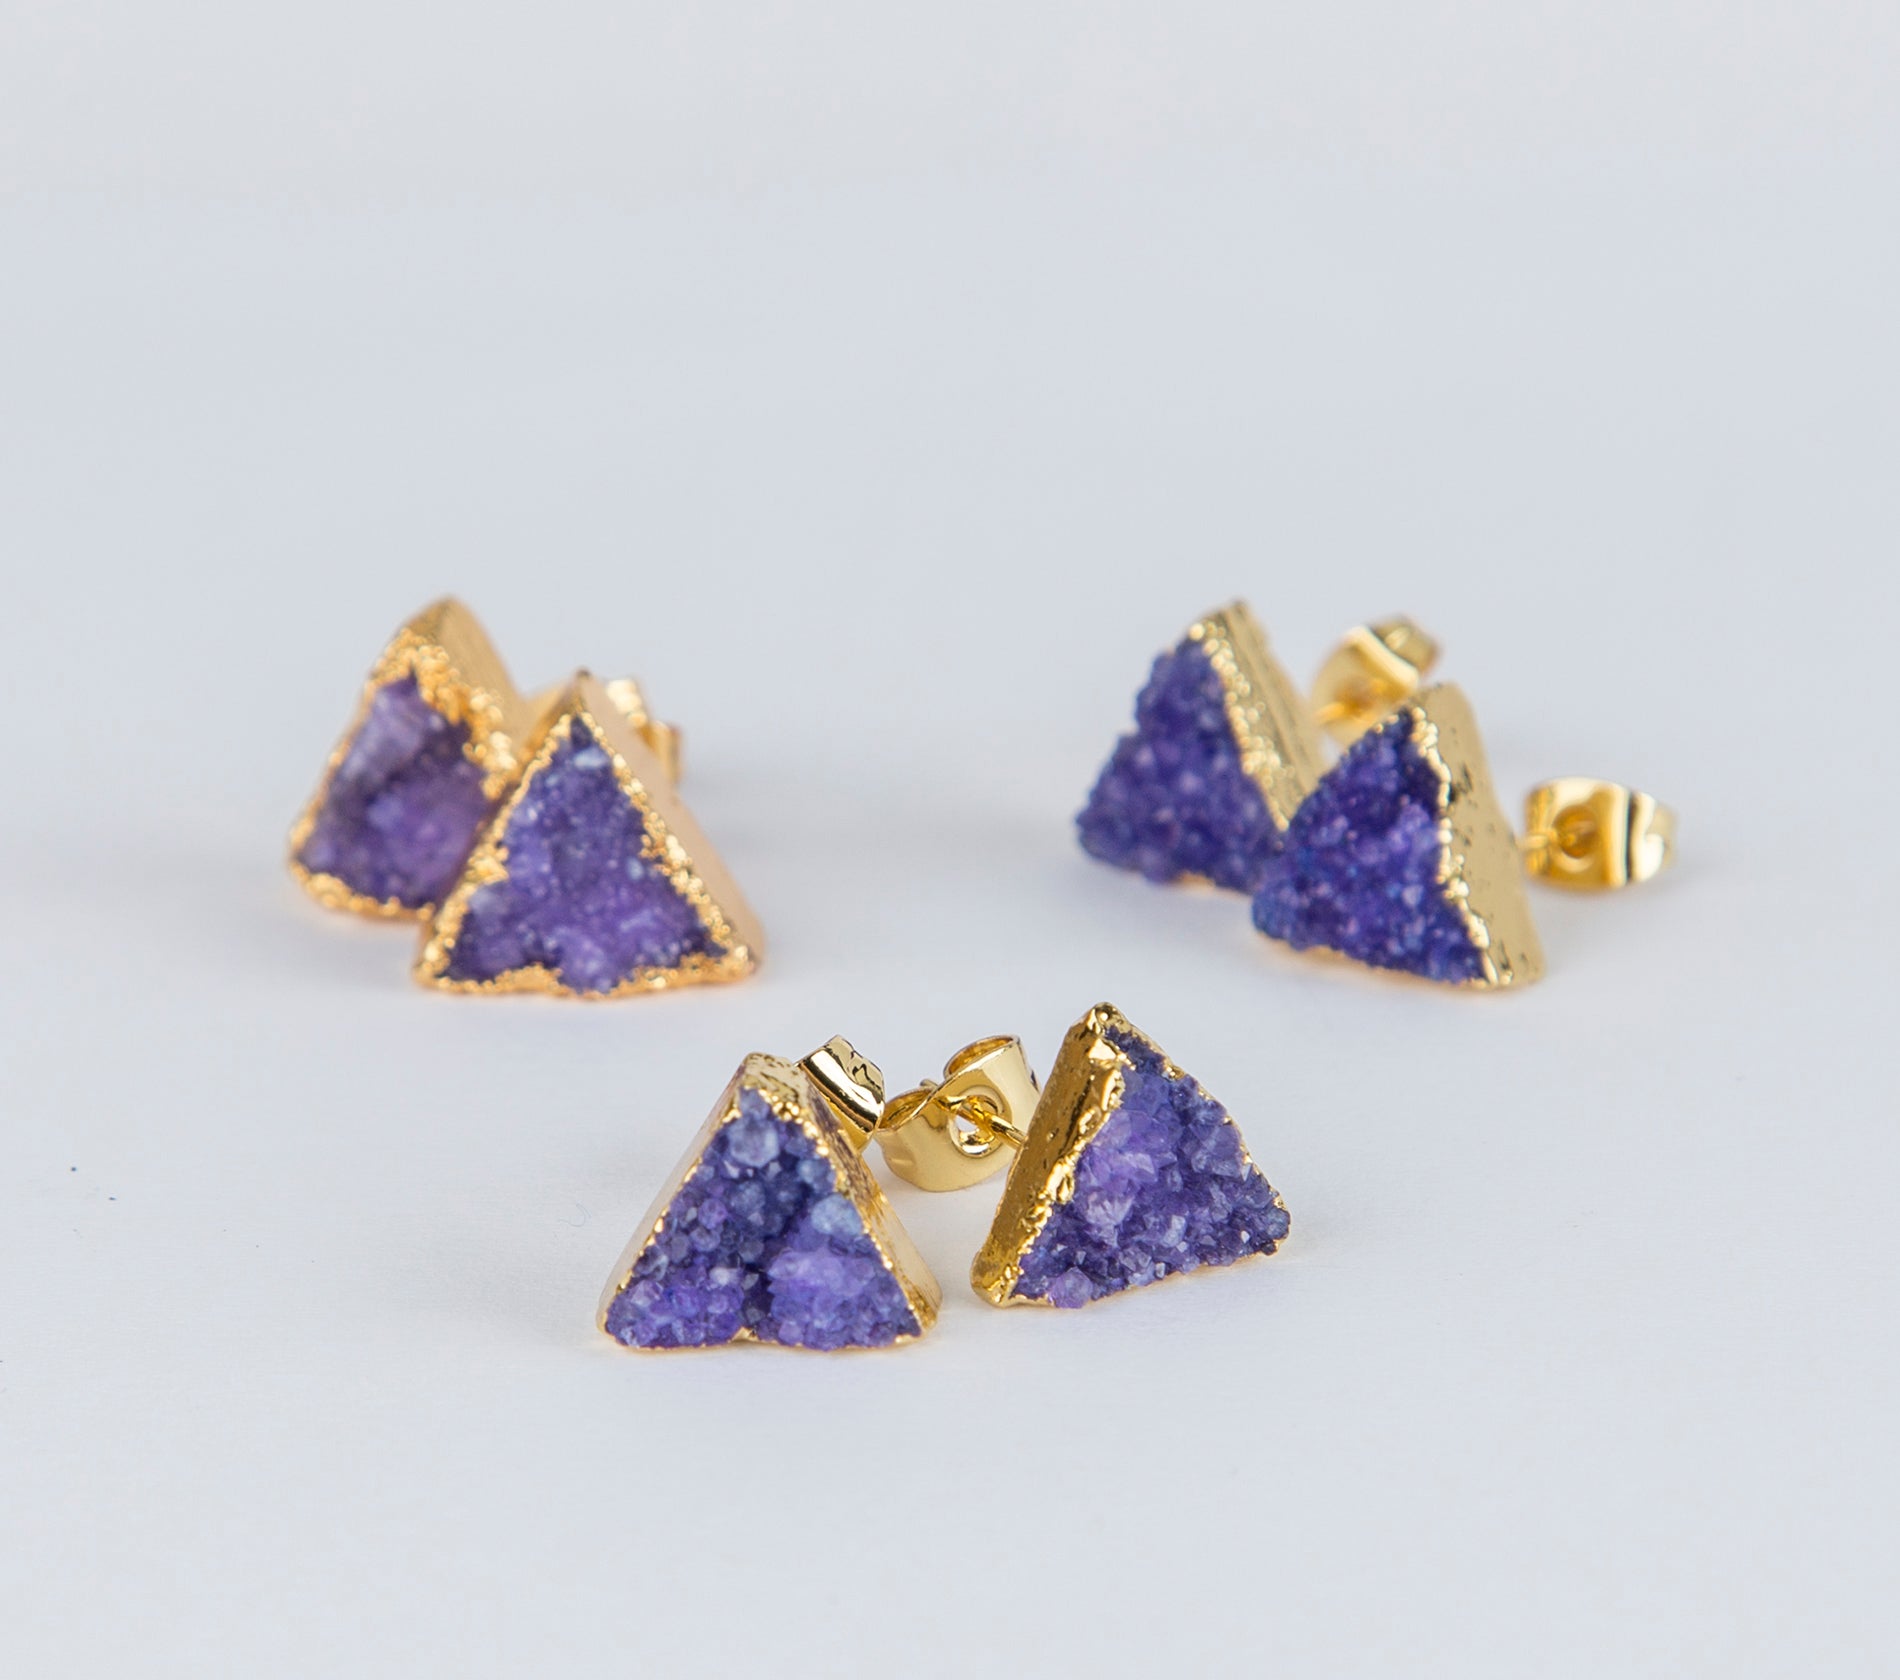 Sparkly Purple Triangle Druzy Earrings - Gold Plated Studs for Summer Style - Earrings - Bijou Her -  -  - 